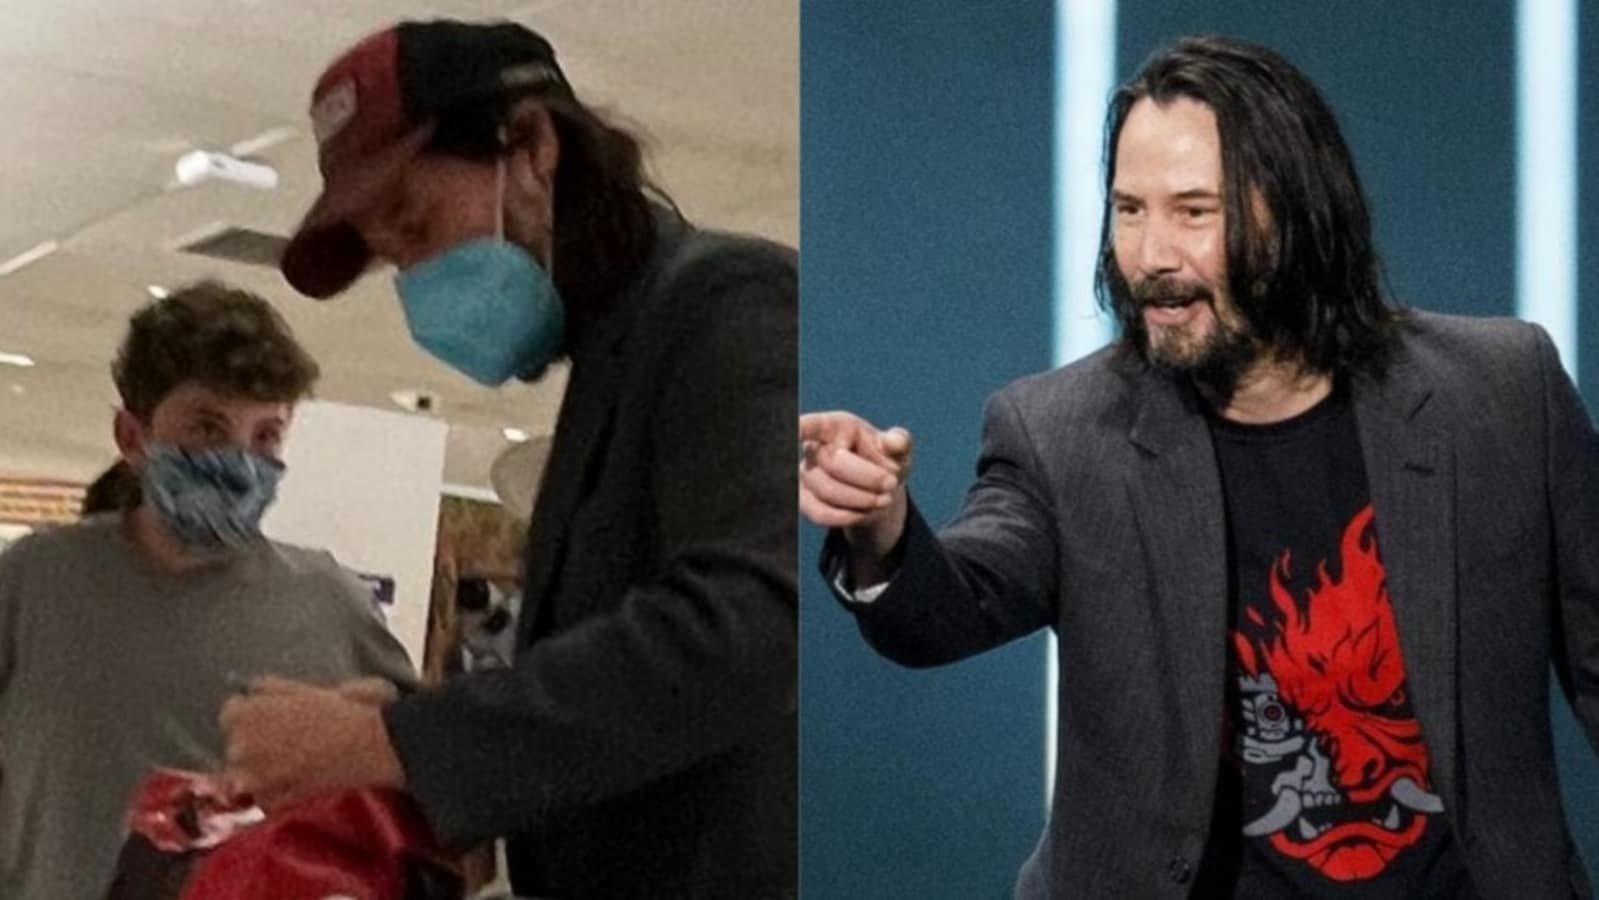 Keanu Reeves ‘happily’ replies to fan’s rapid-fire questions at New York airport